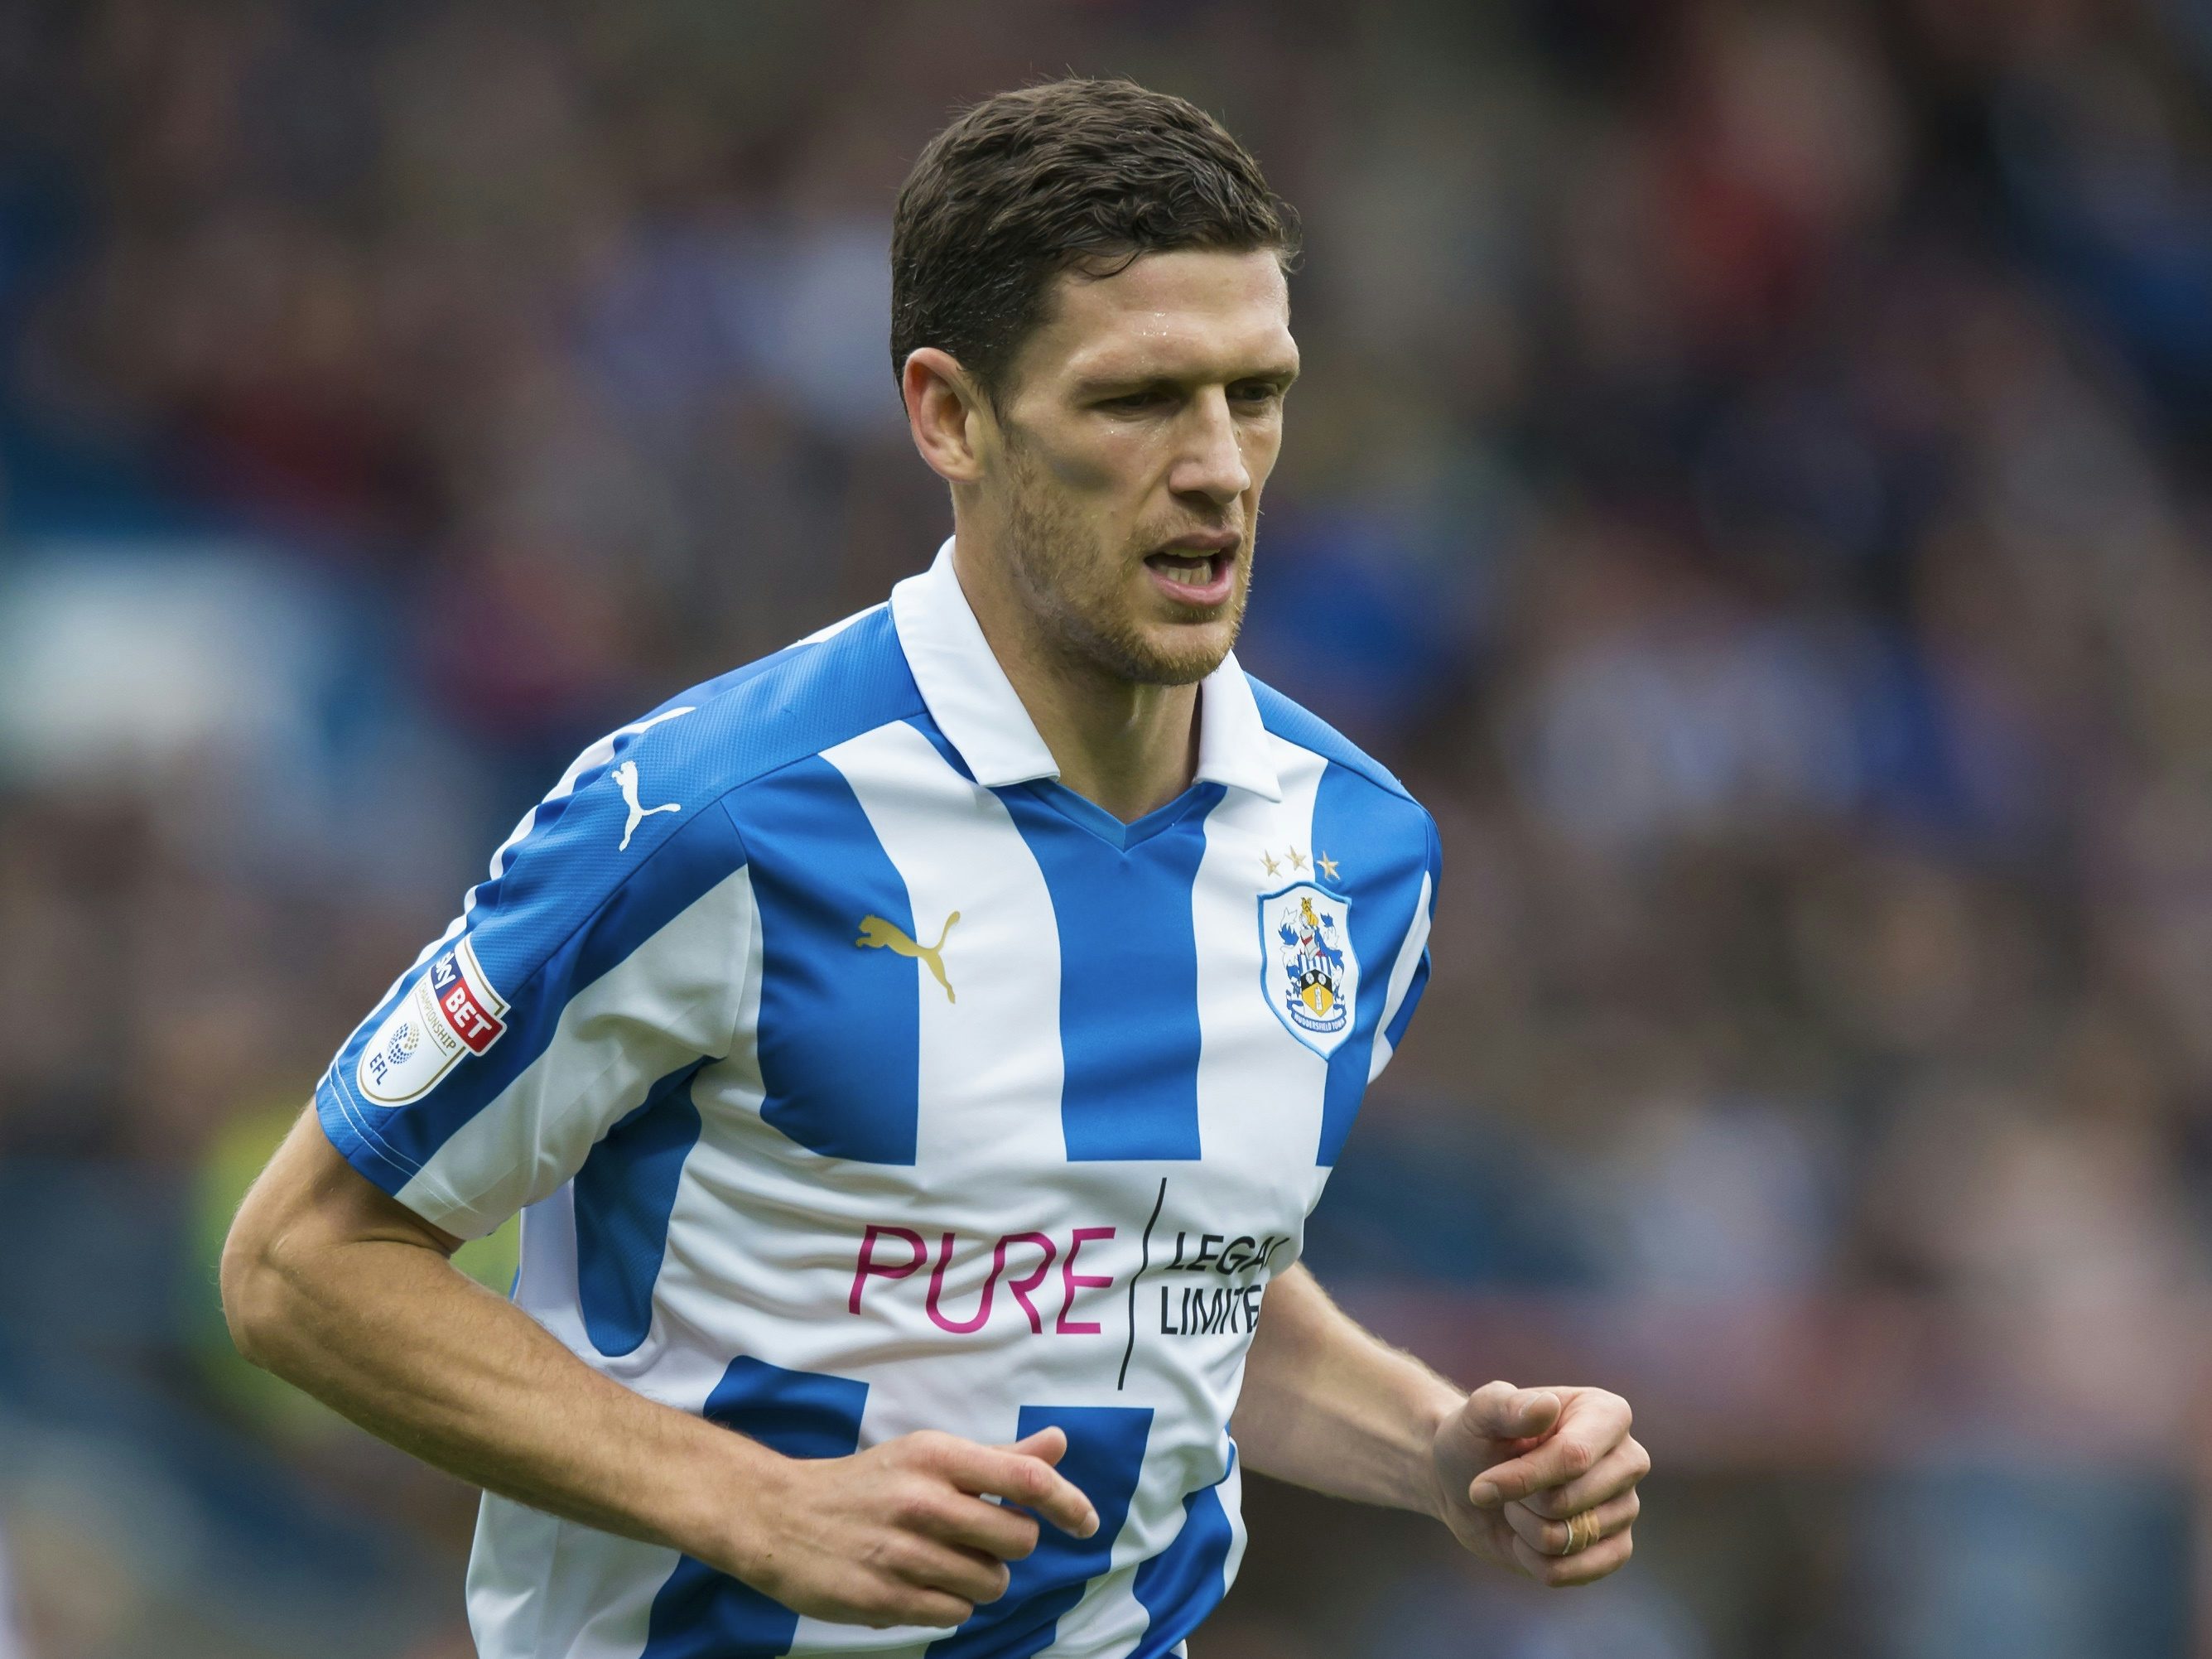 Huddersfield Town defender Mark Hudson during the Championship match against Sheffield Wednesday on October 16, 2016